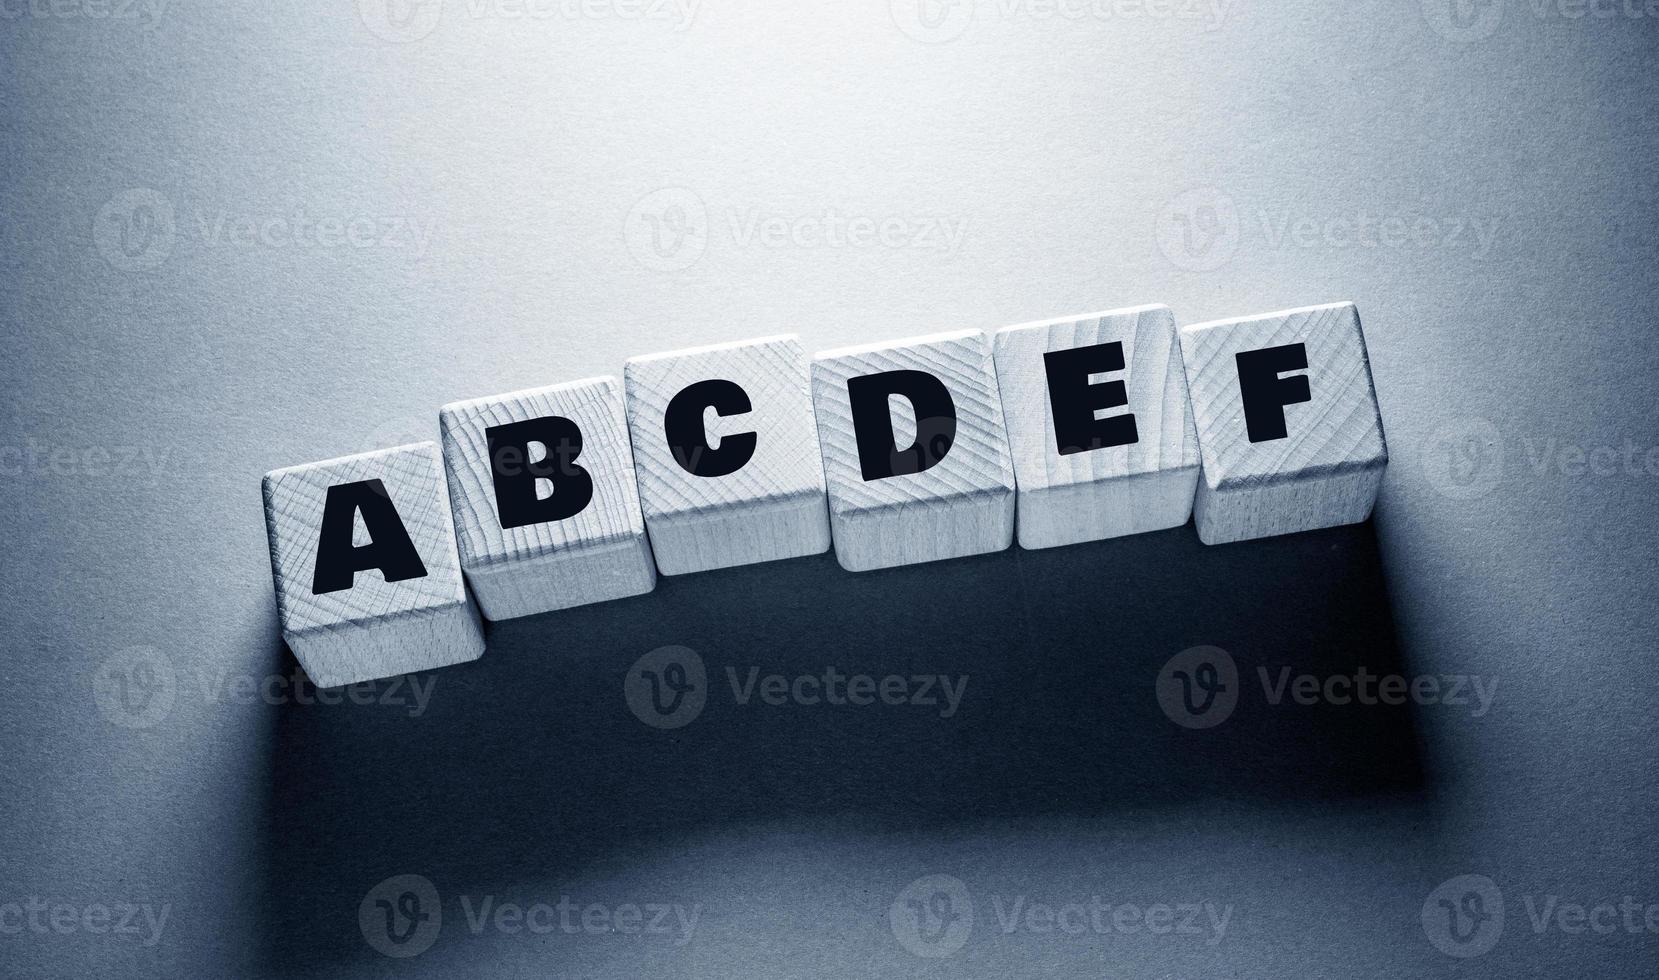 Alphabet English Word with Wooden Cubes photo